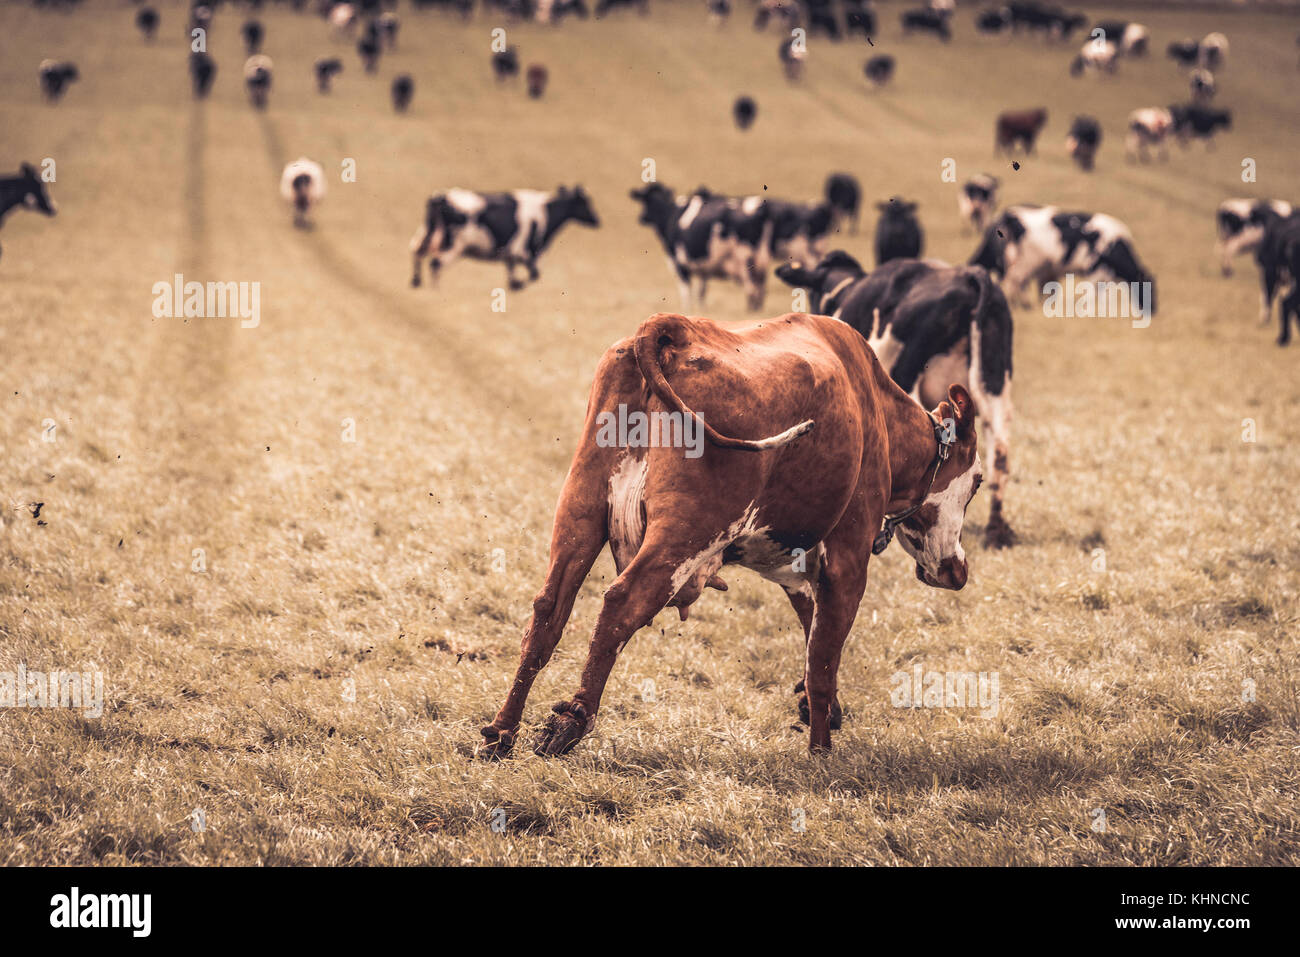 Hereford calf running and jumping on a rural field with black and white cows in the spring Stock Photo